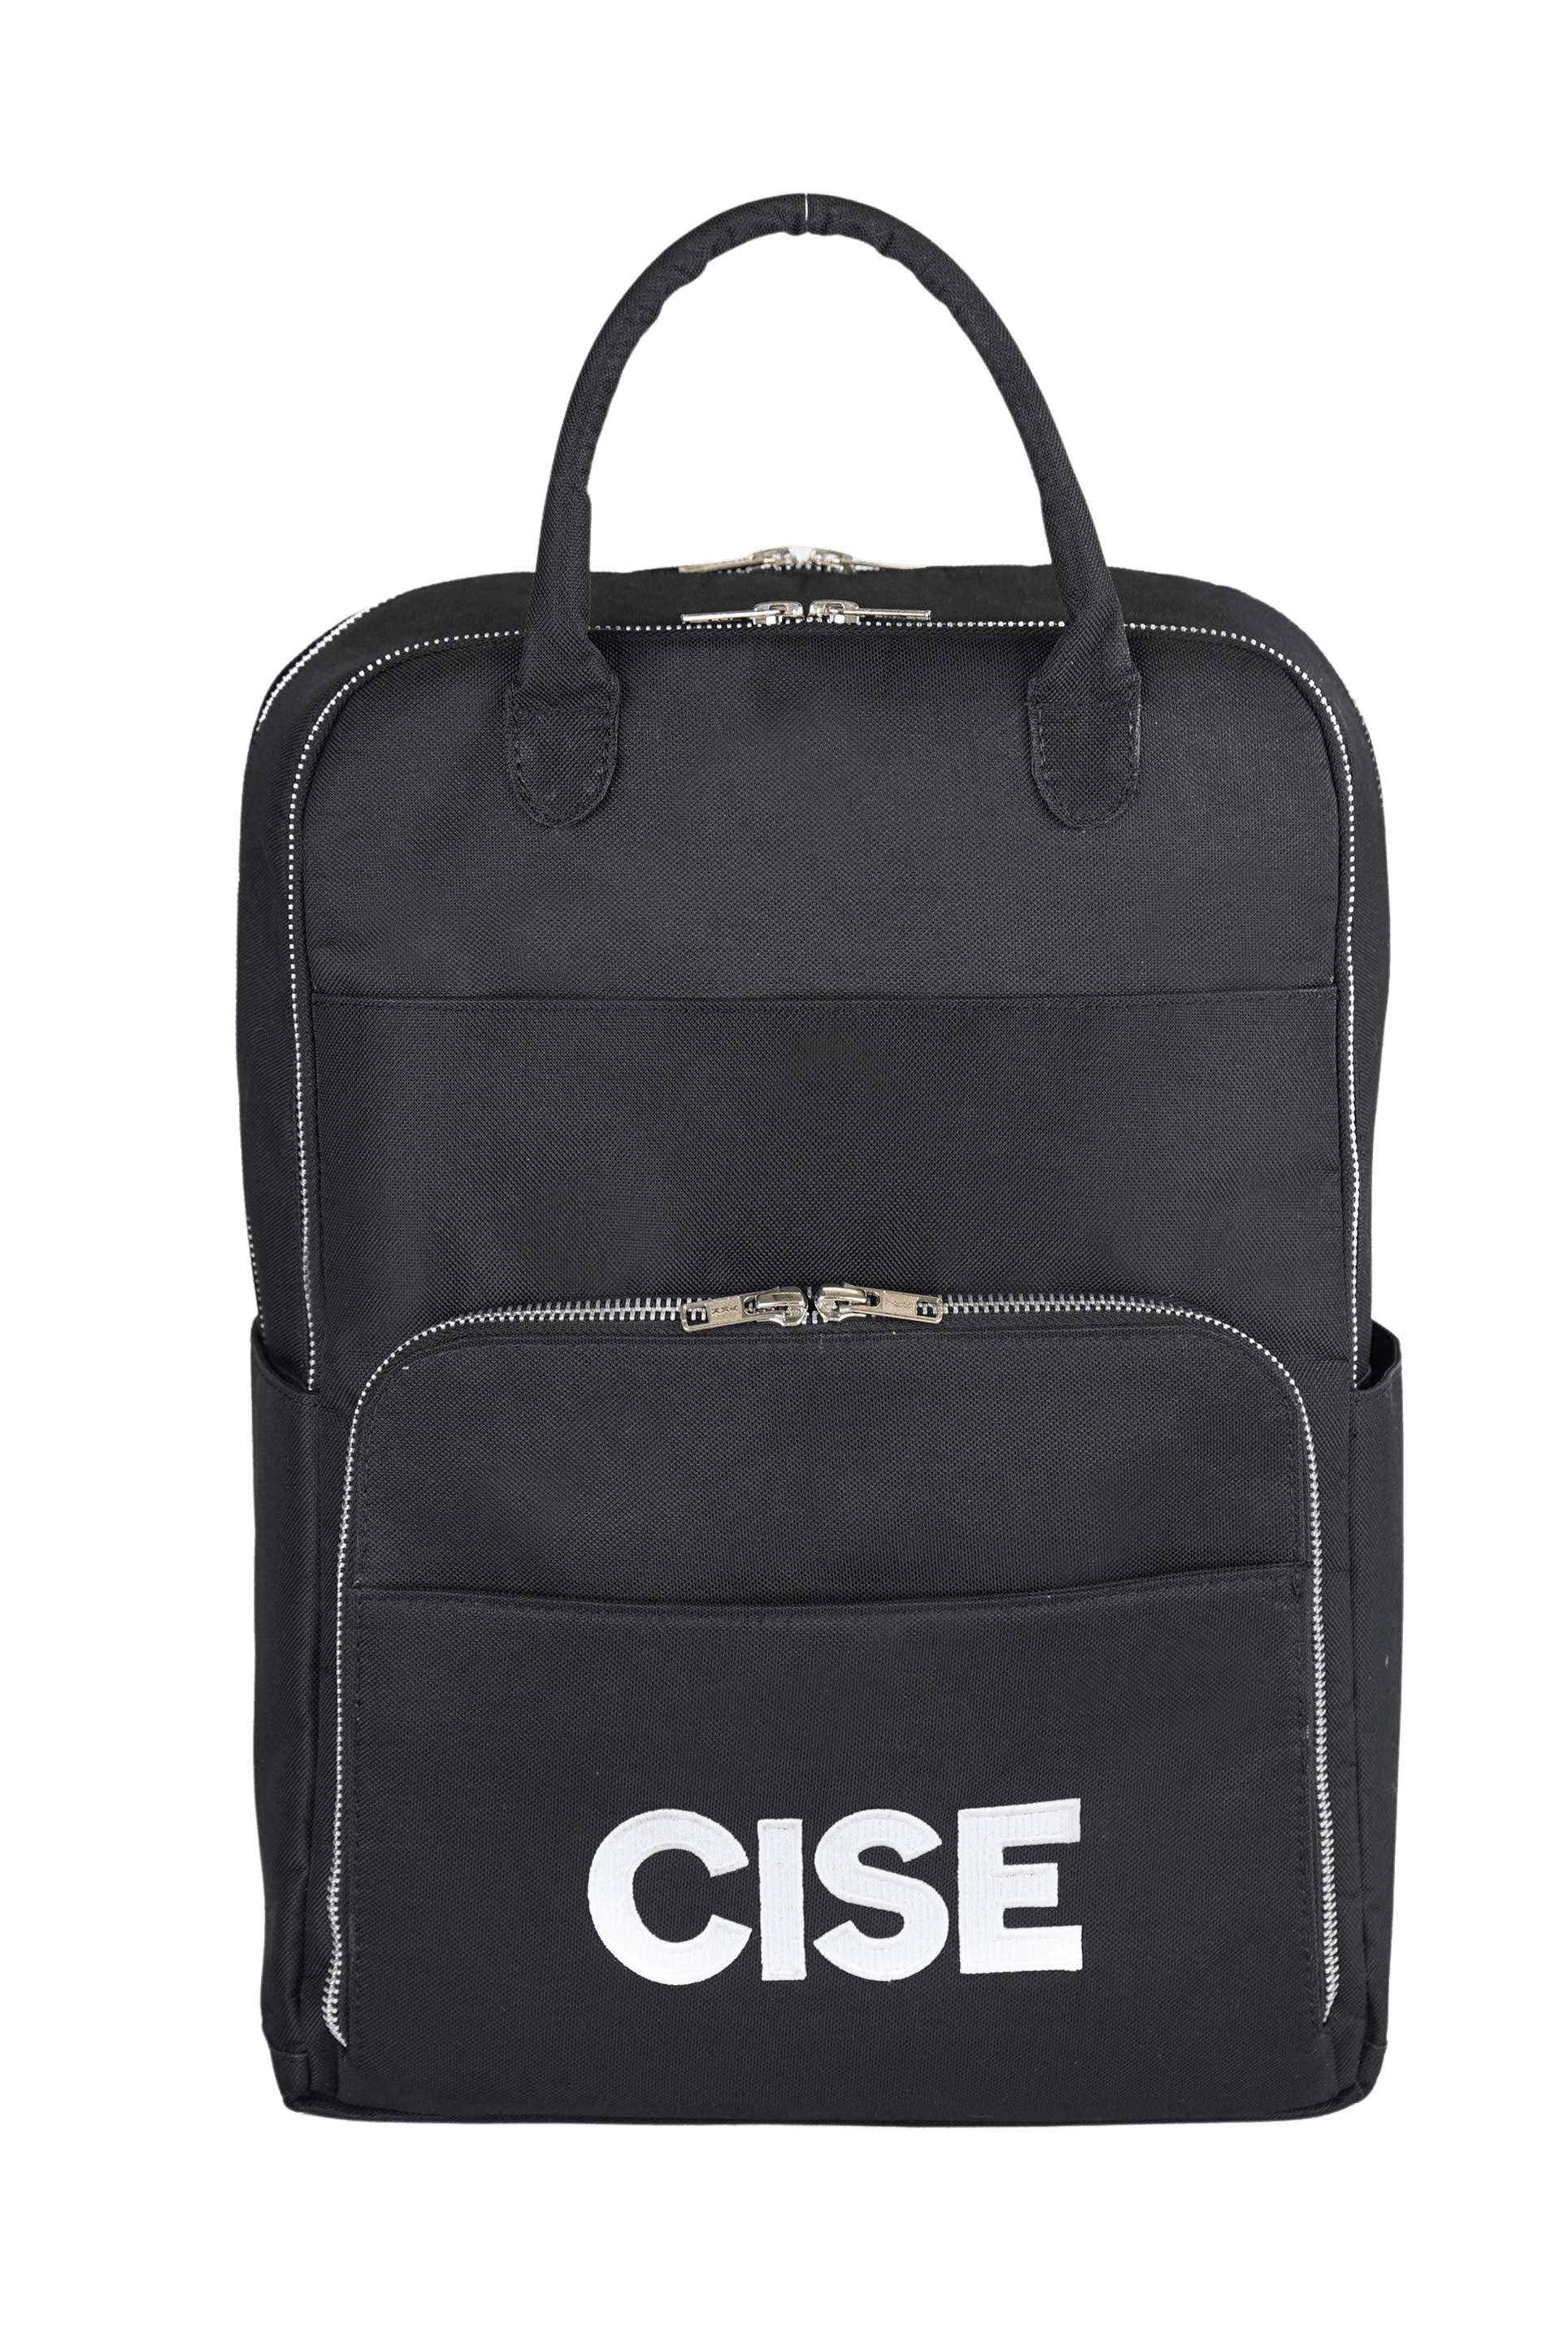 BAGS PBW Protect Black Women Bags | CISE |